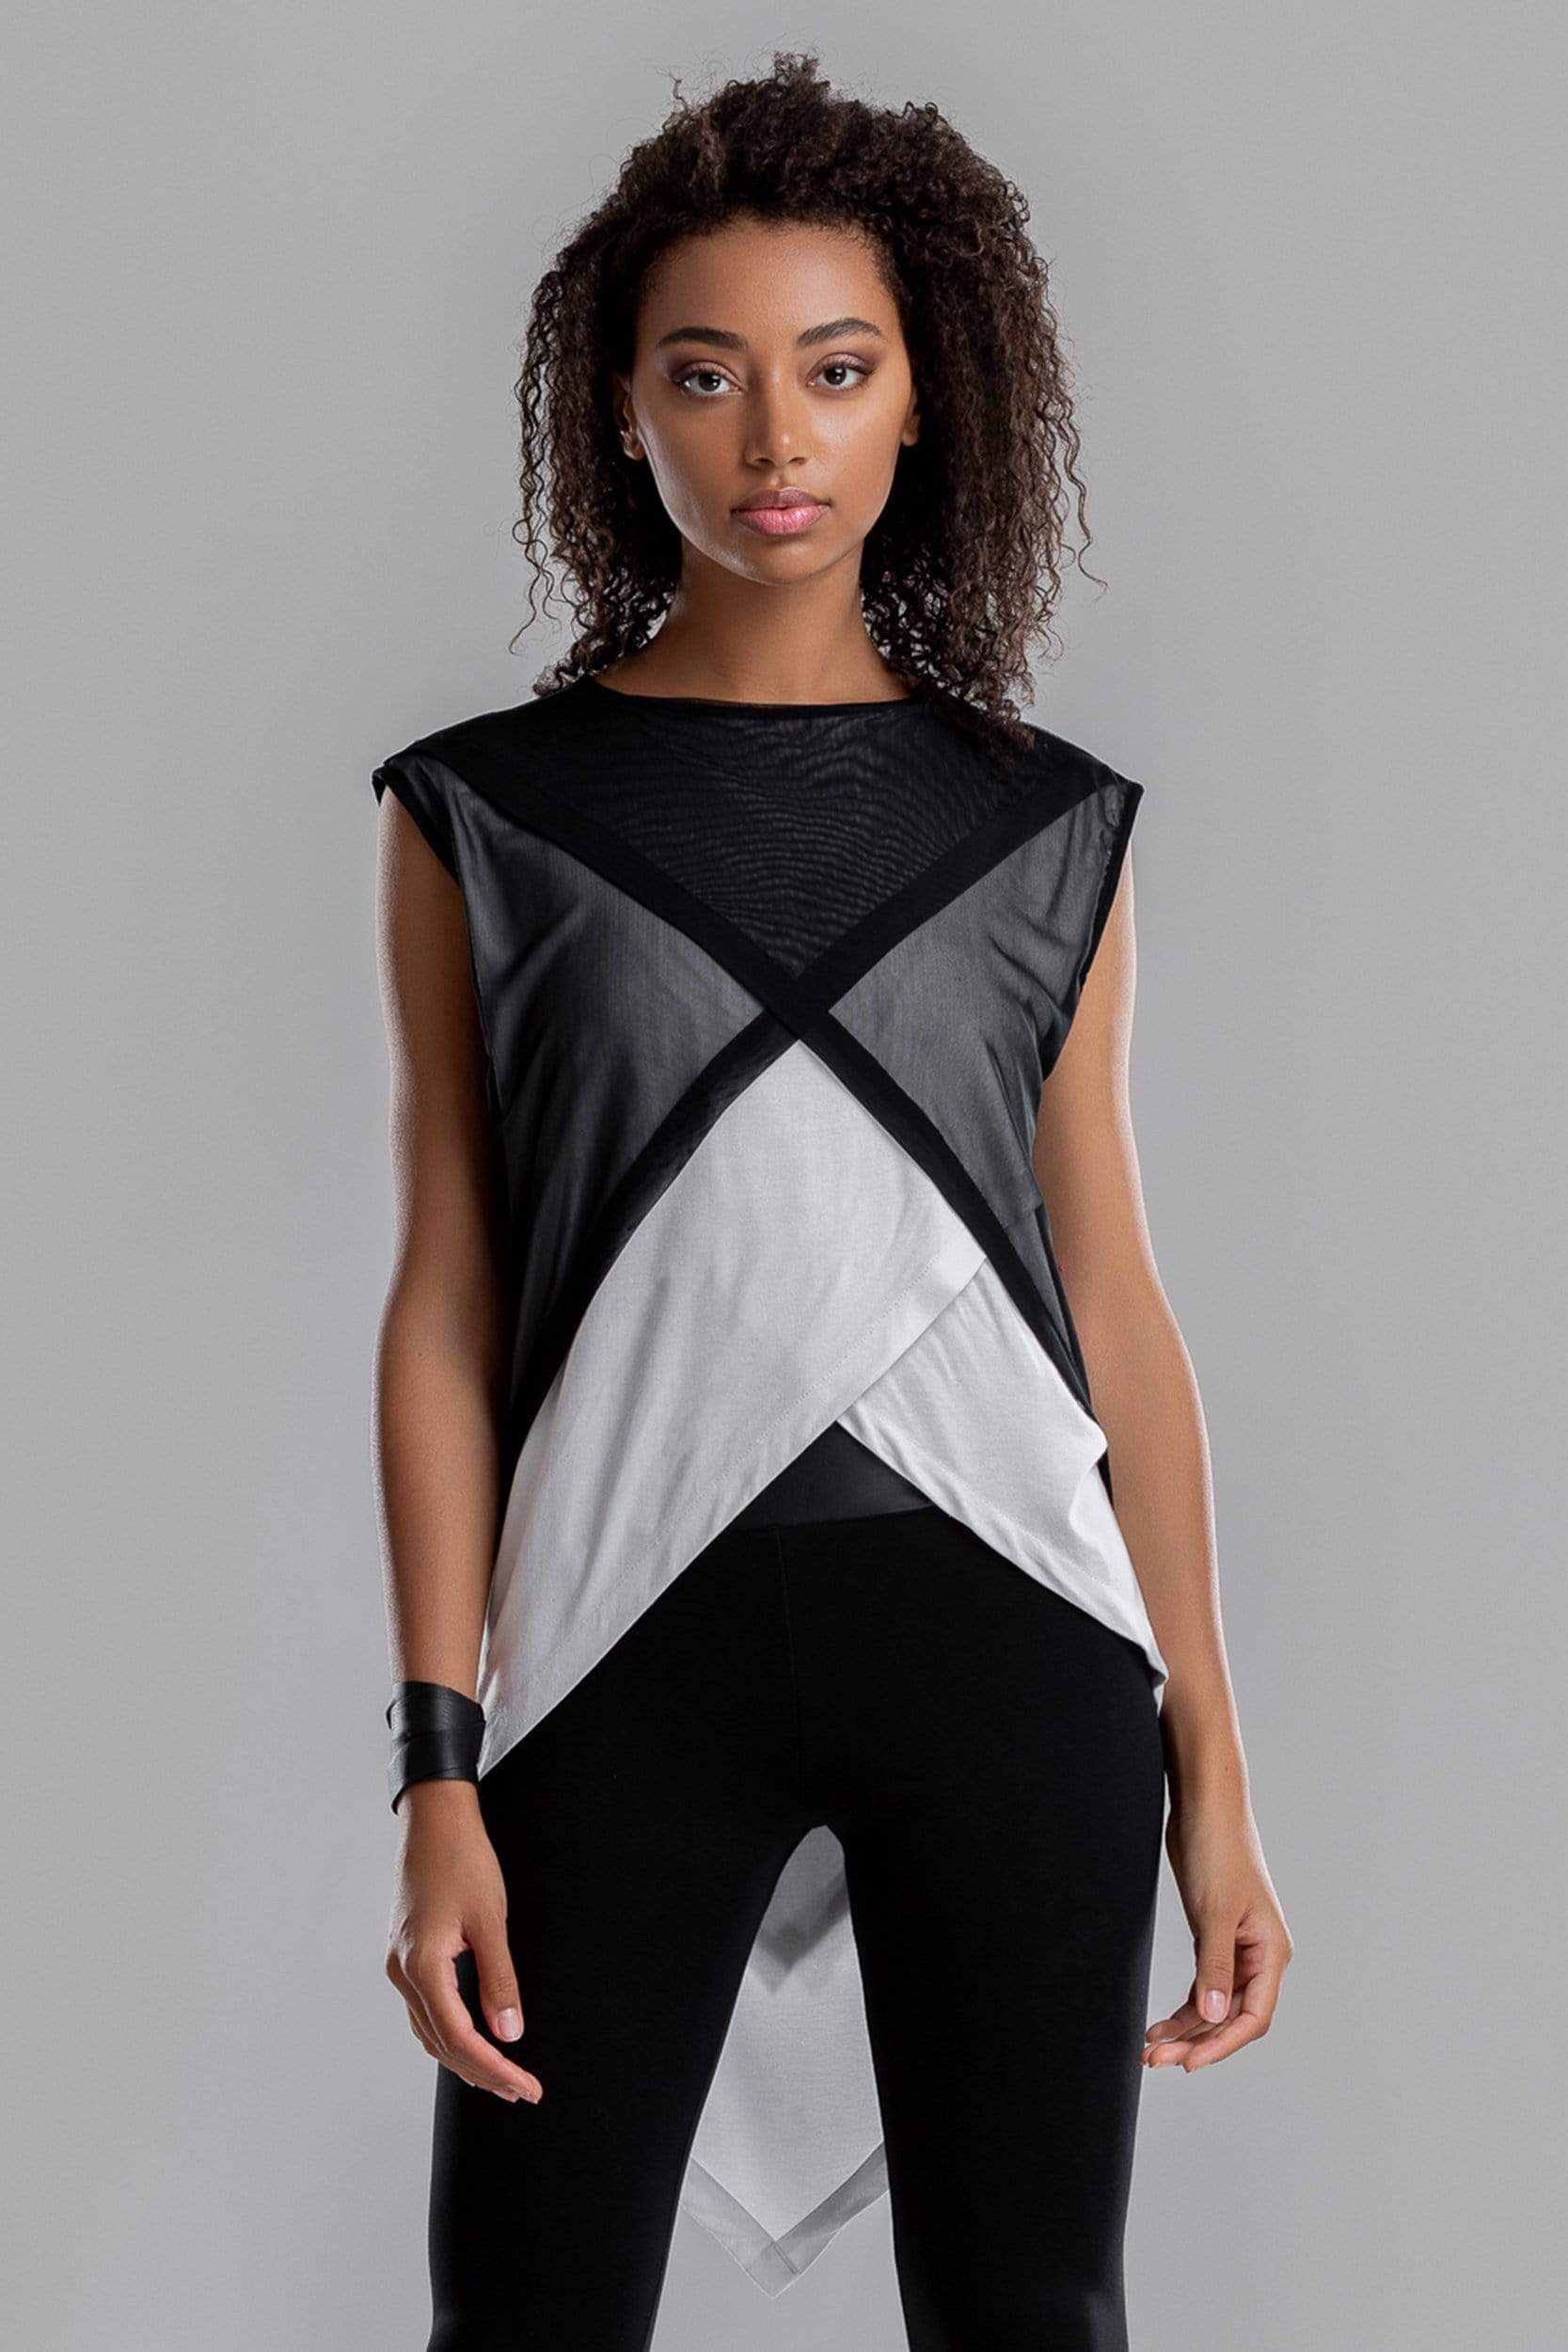 MDNT45 Sweaters, Tunics & Tops Asymmetrical white shirt with black mesh top